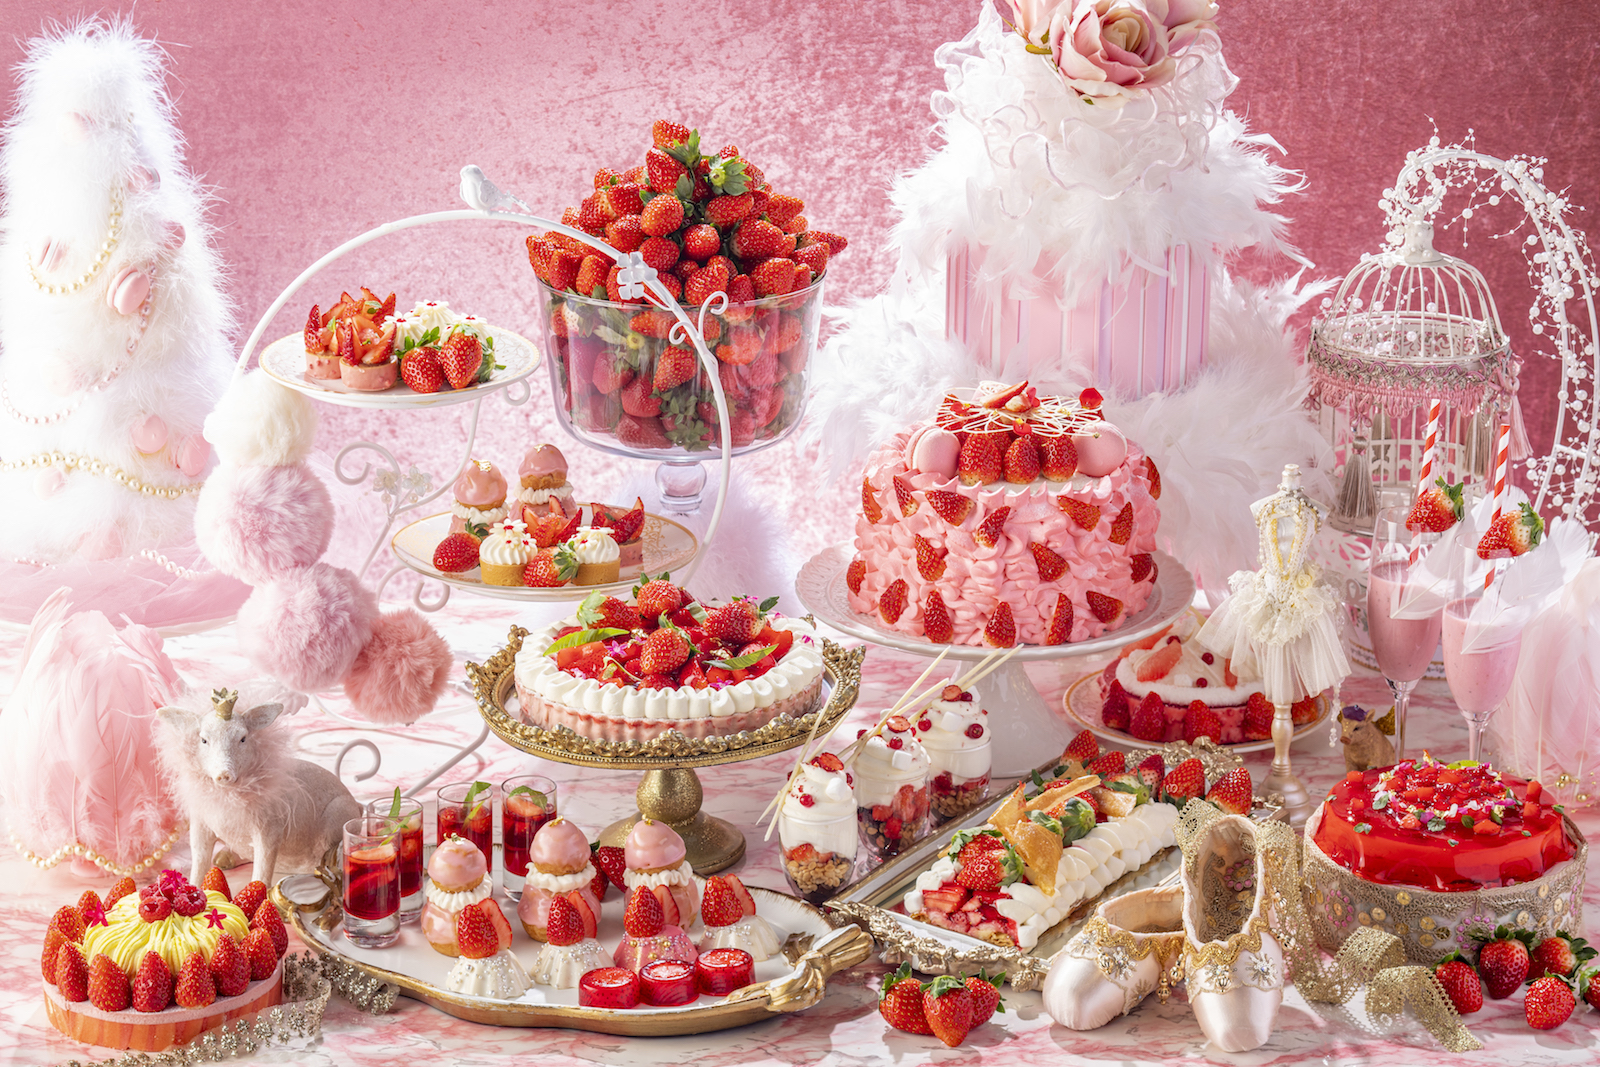 A grand strawberry affair for your Valentine at Hilton Tokyo - Japan Today